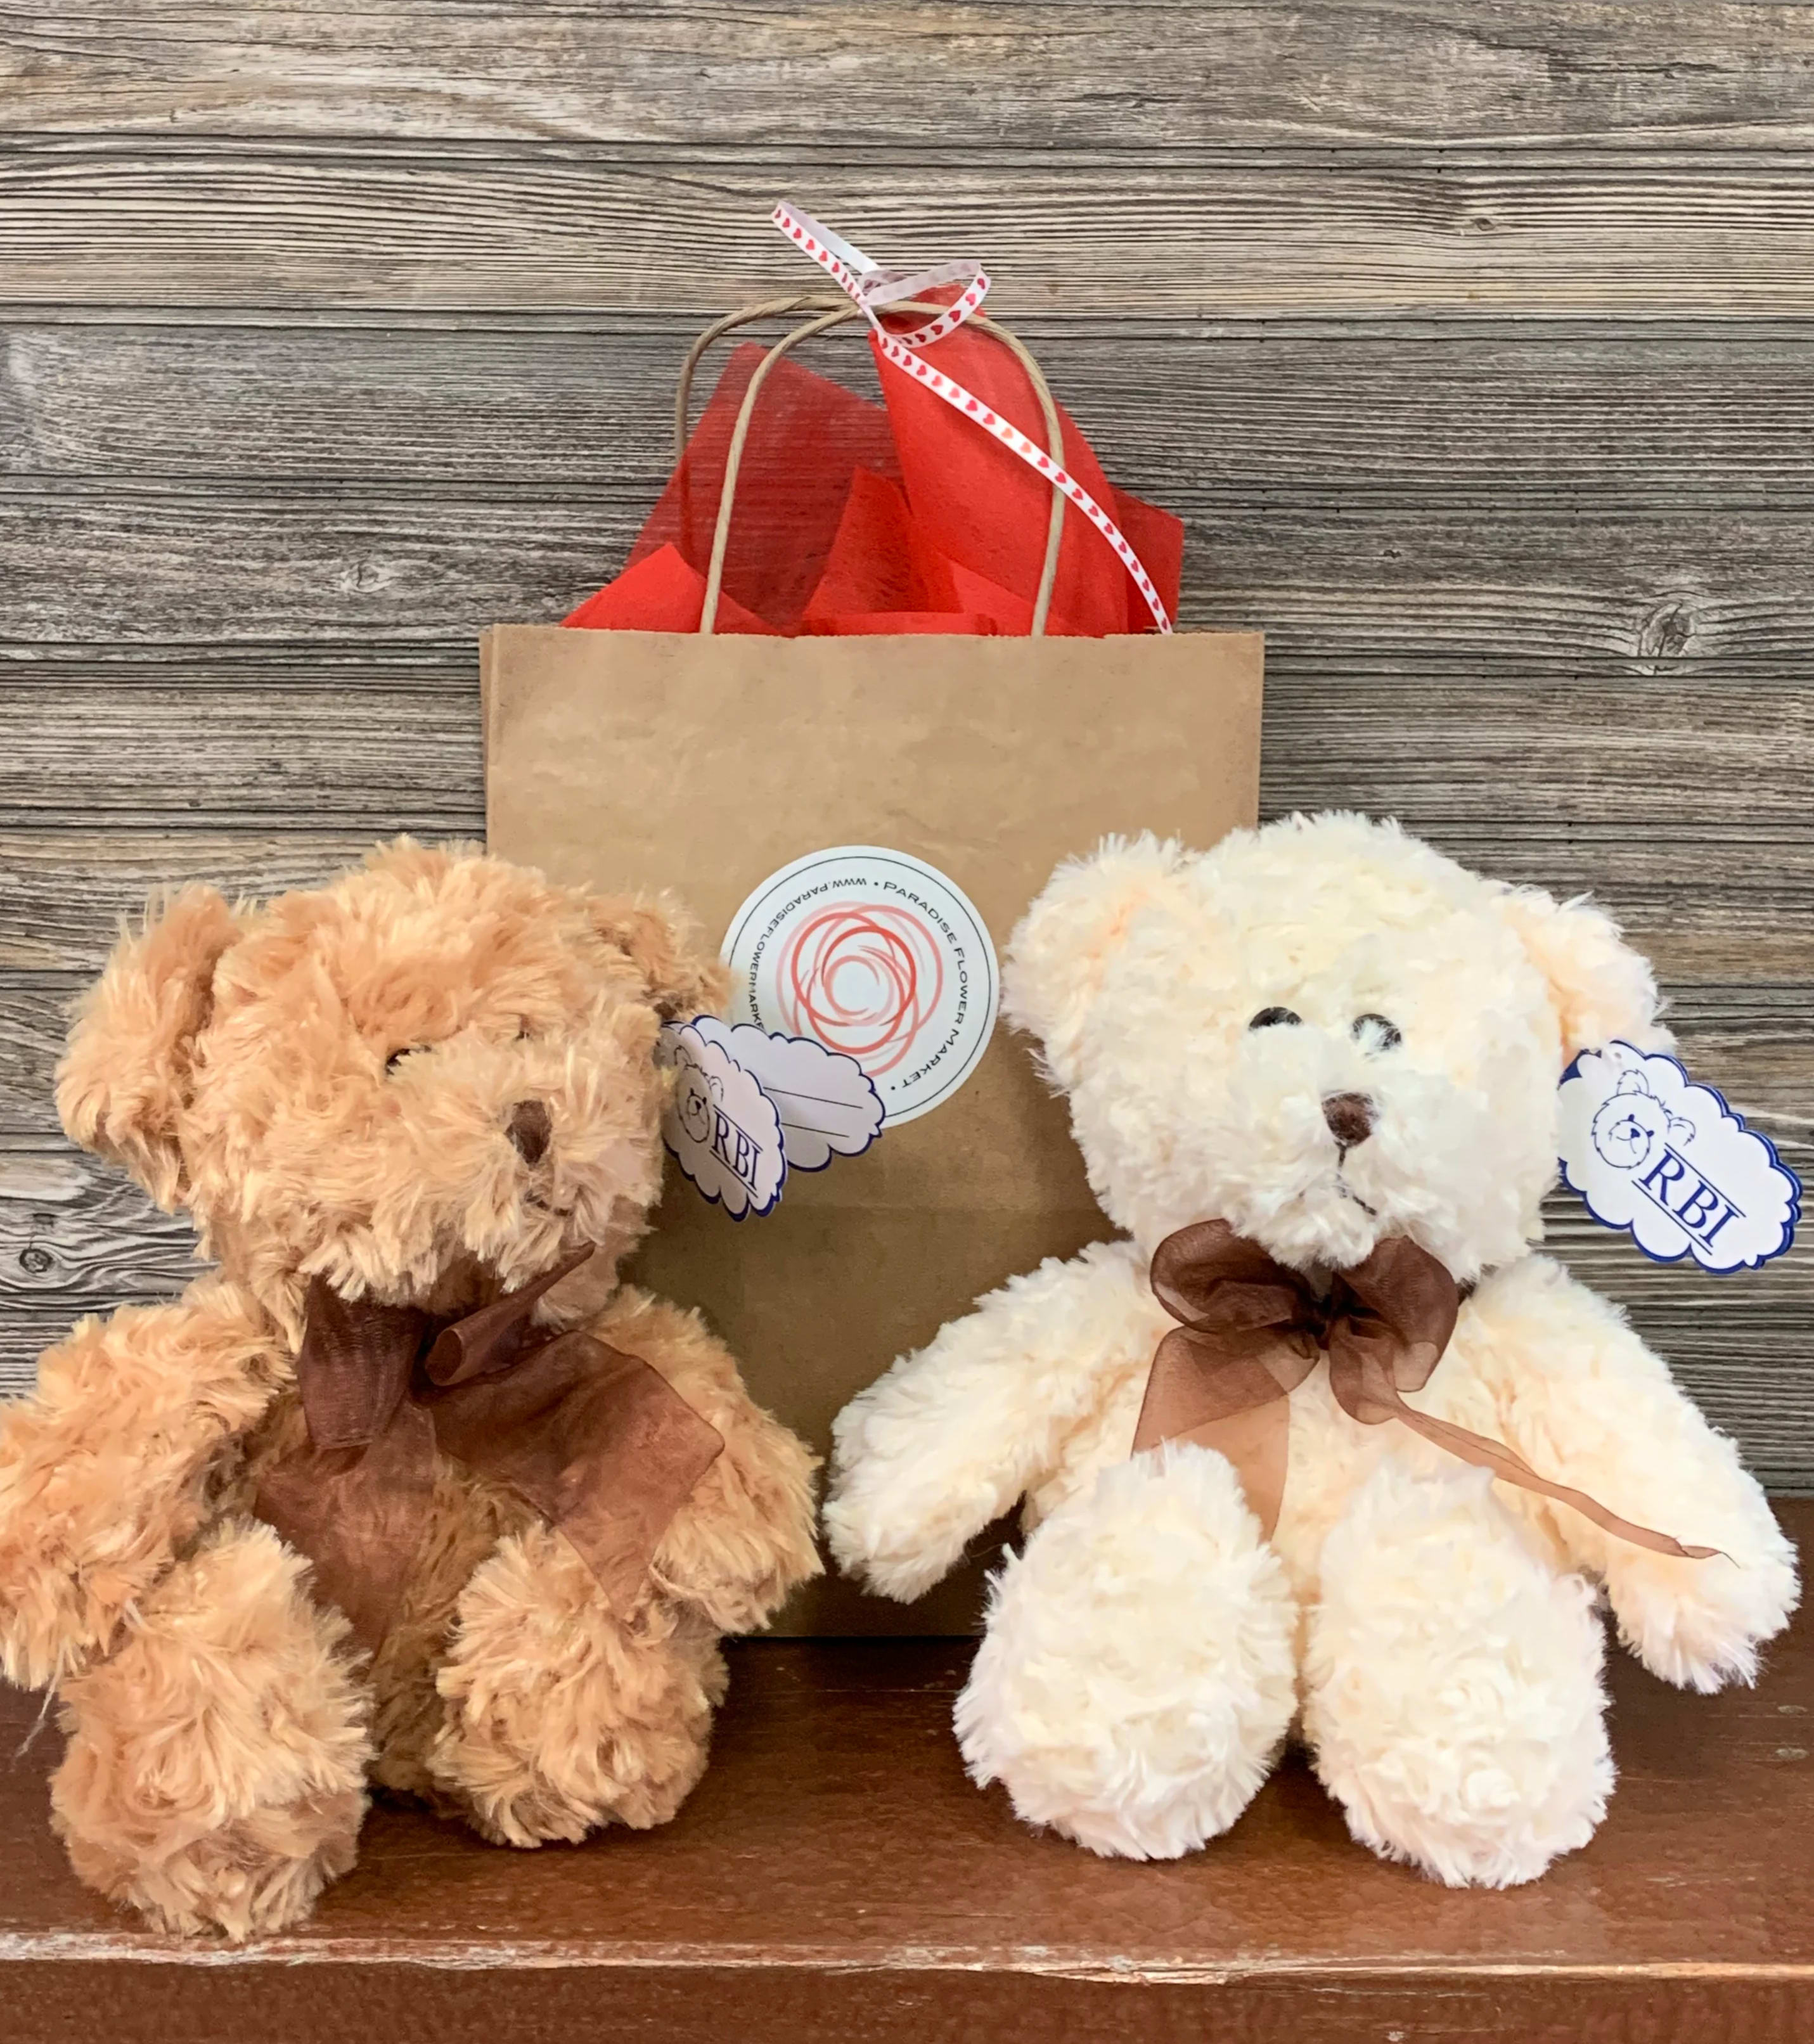 Teddy Bear- Light Brown or Dark Brown  - 13 inch Brown or White Teddy soft plush bear.  Please note if you would like a particular color in notes or the designers will make the best choice for you! 